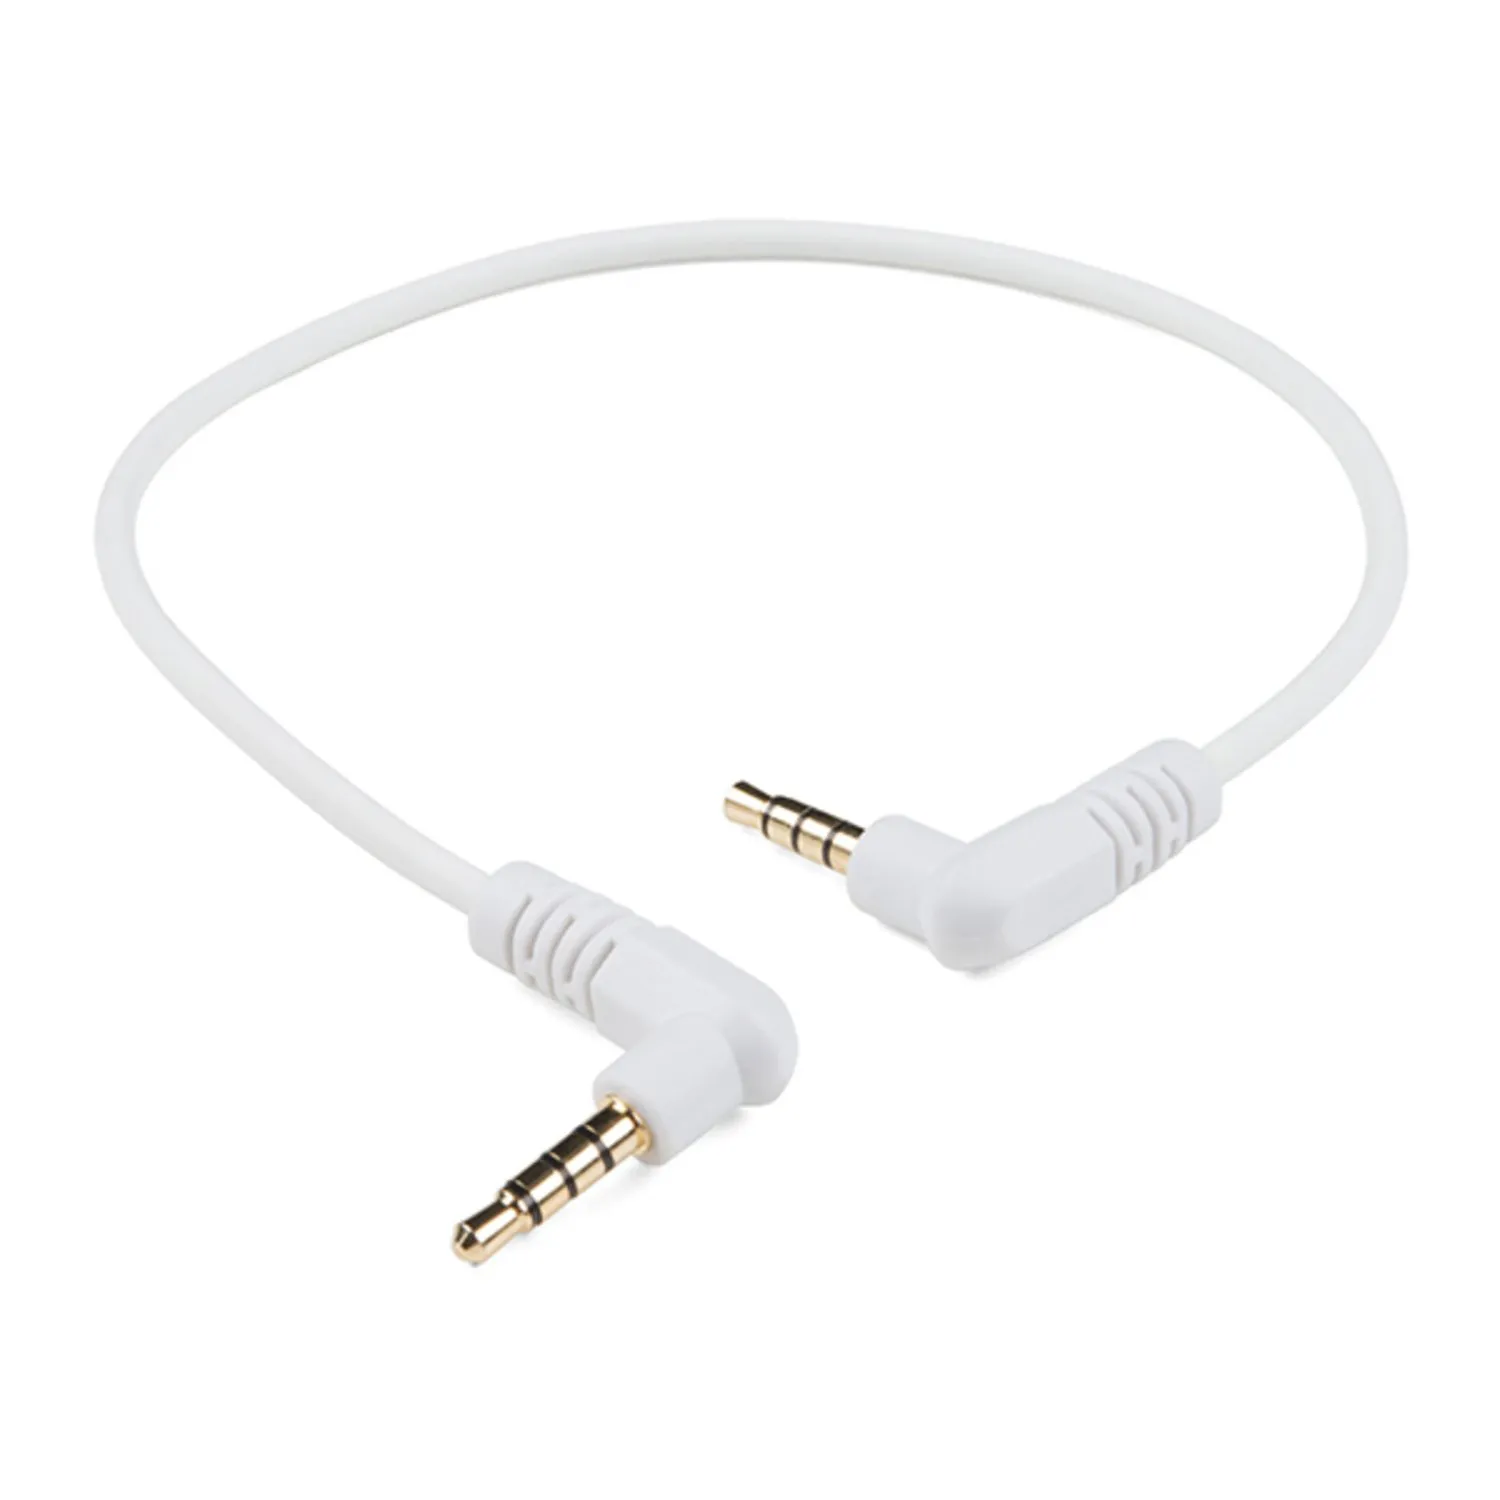 Photo of Audio Cable TRRS - 1ft